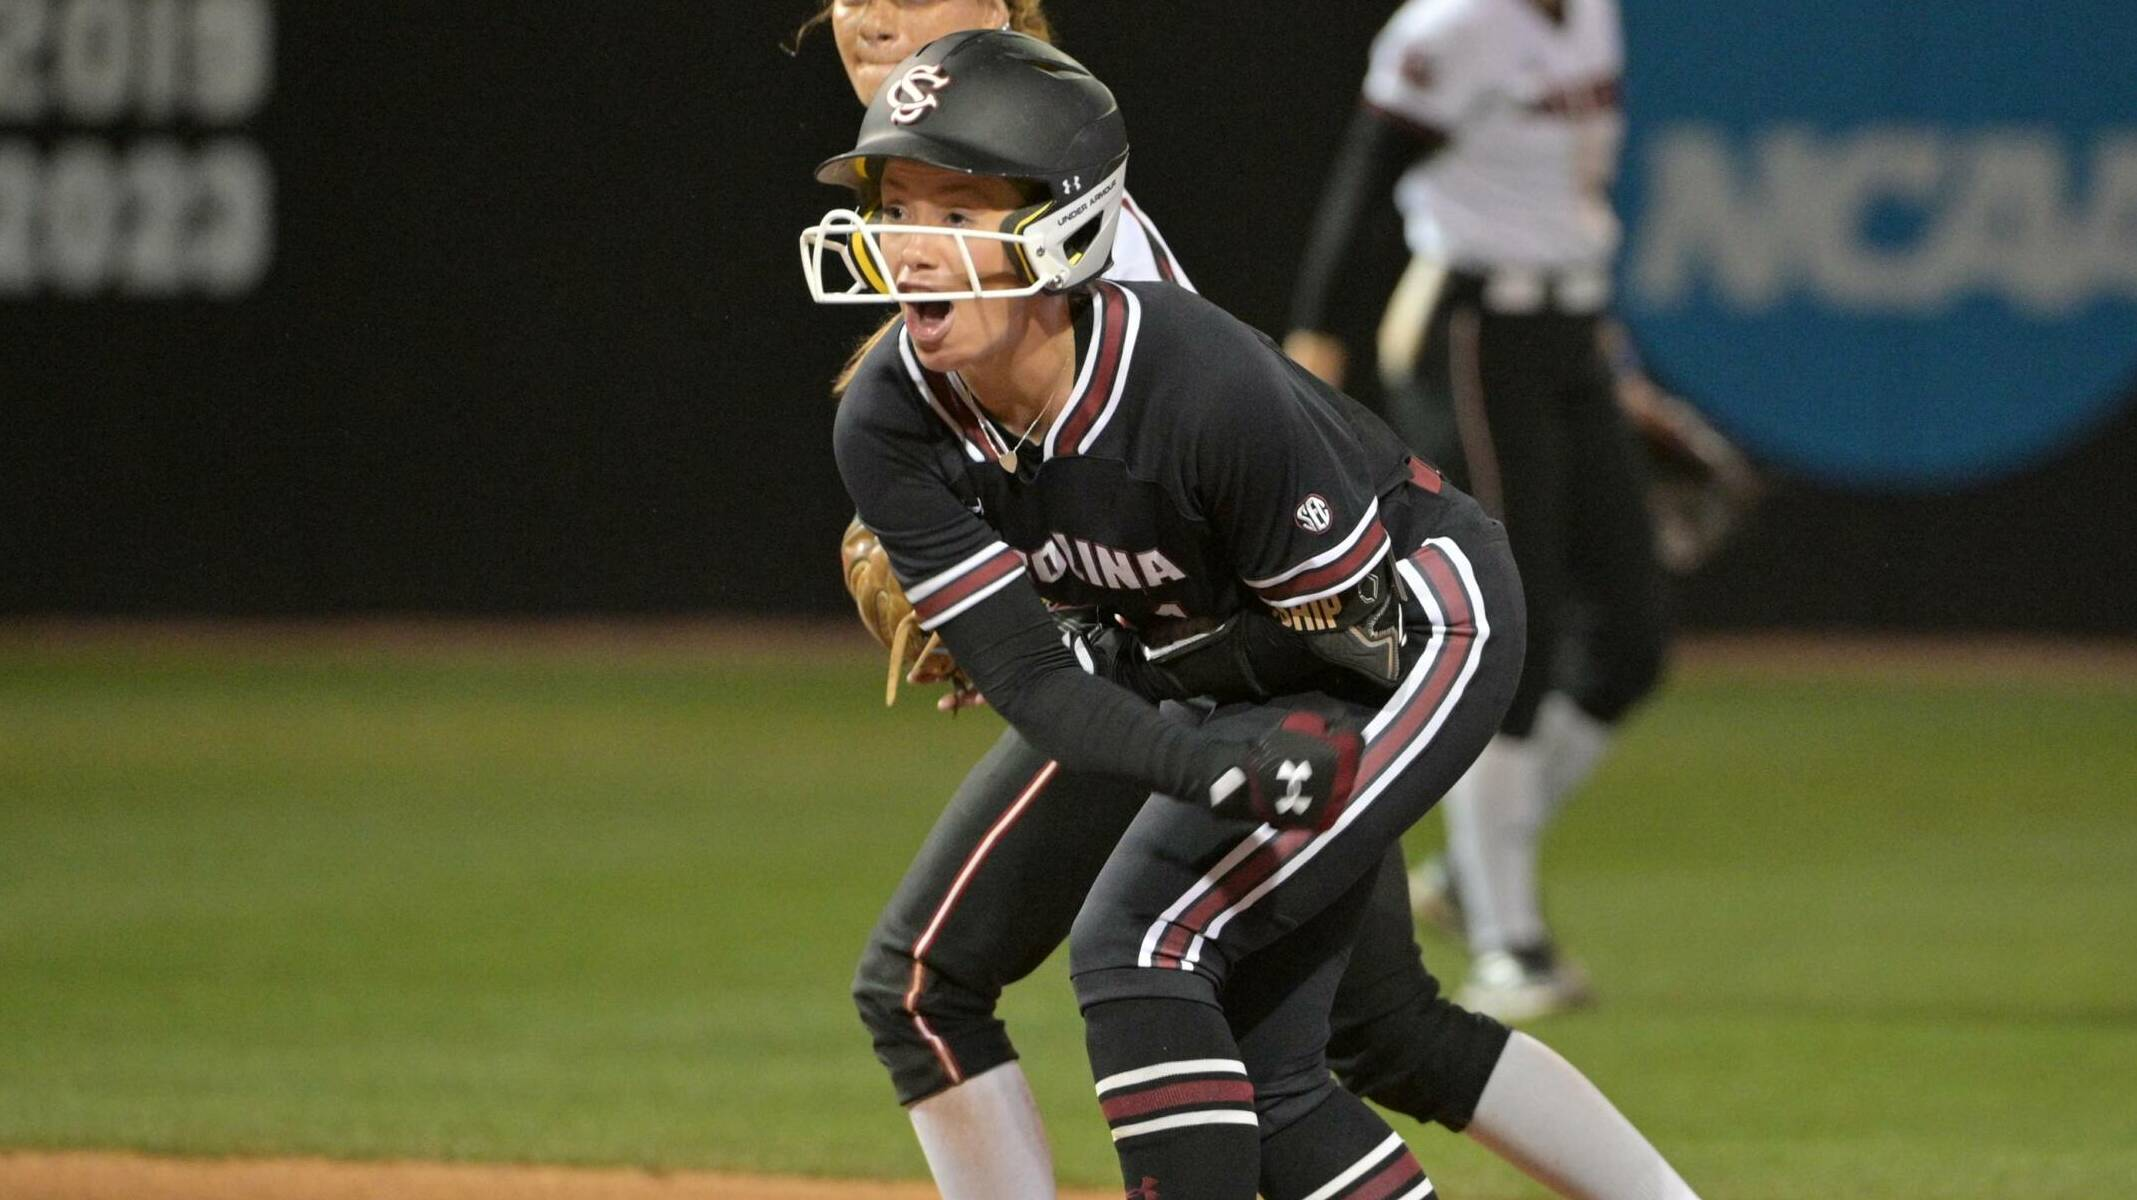 No. 23 Softball Earns Pair of Victories on Day Two of Carolina Classic